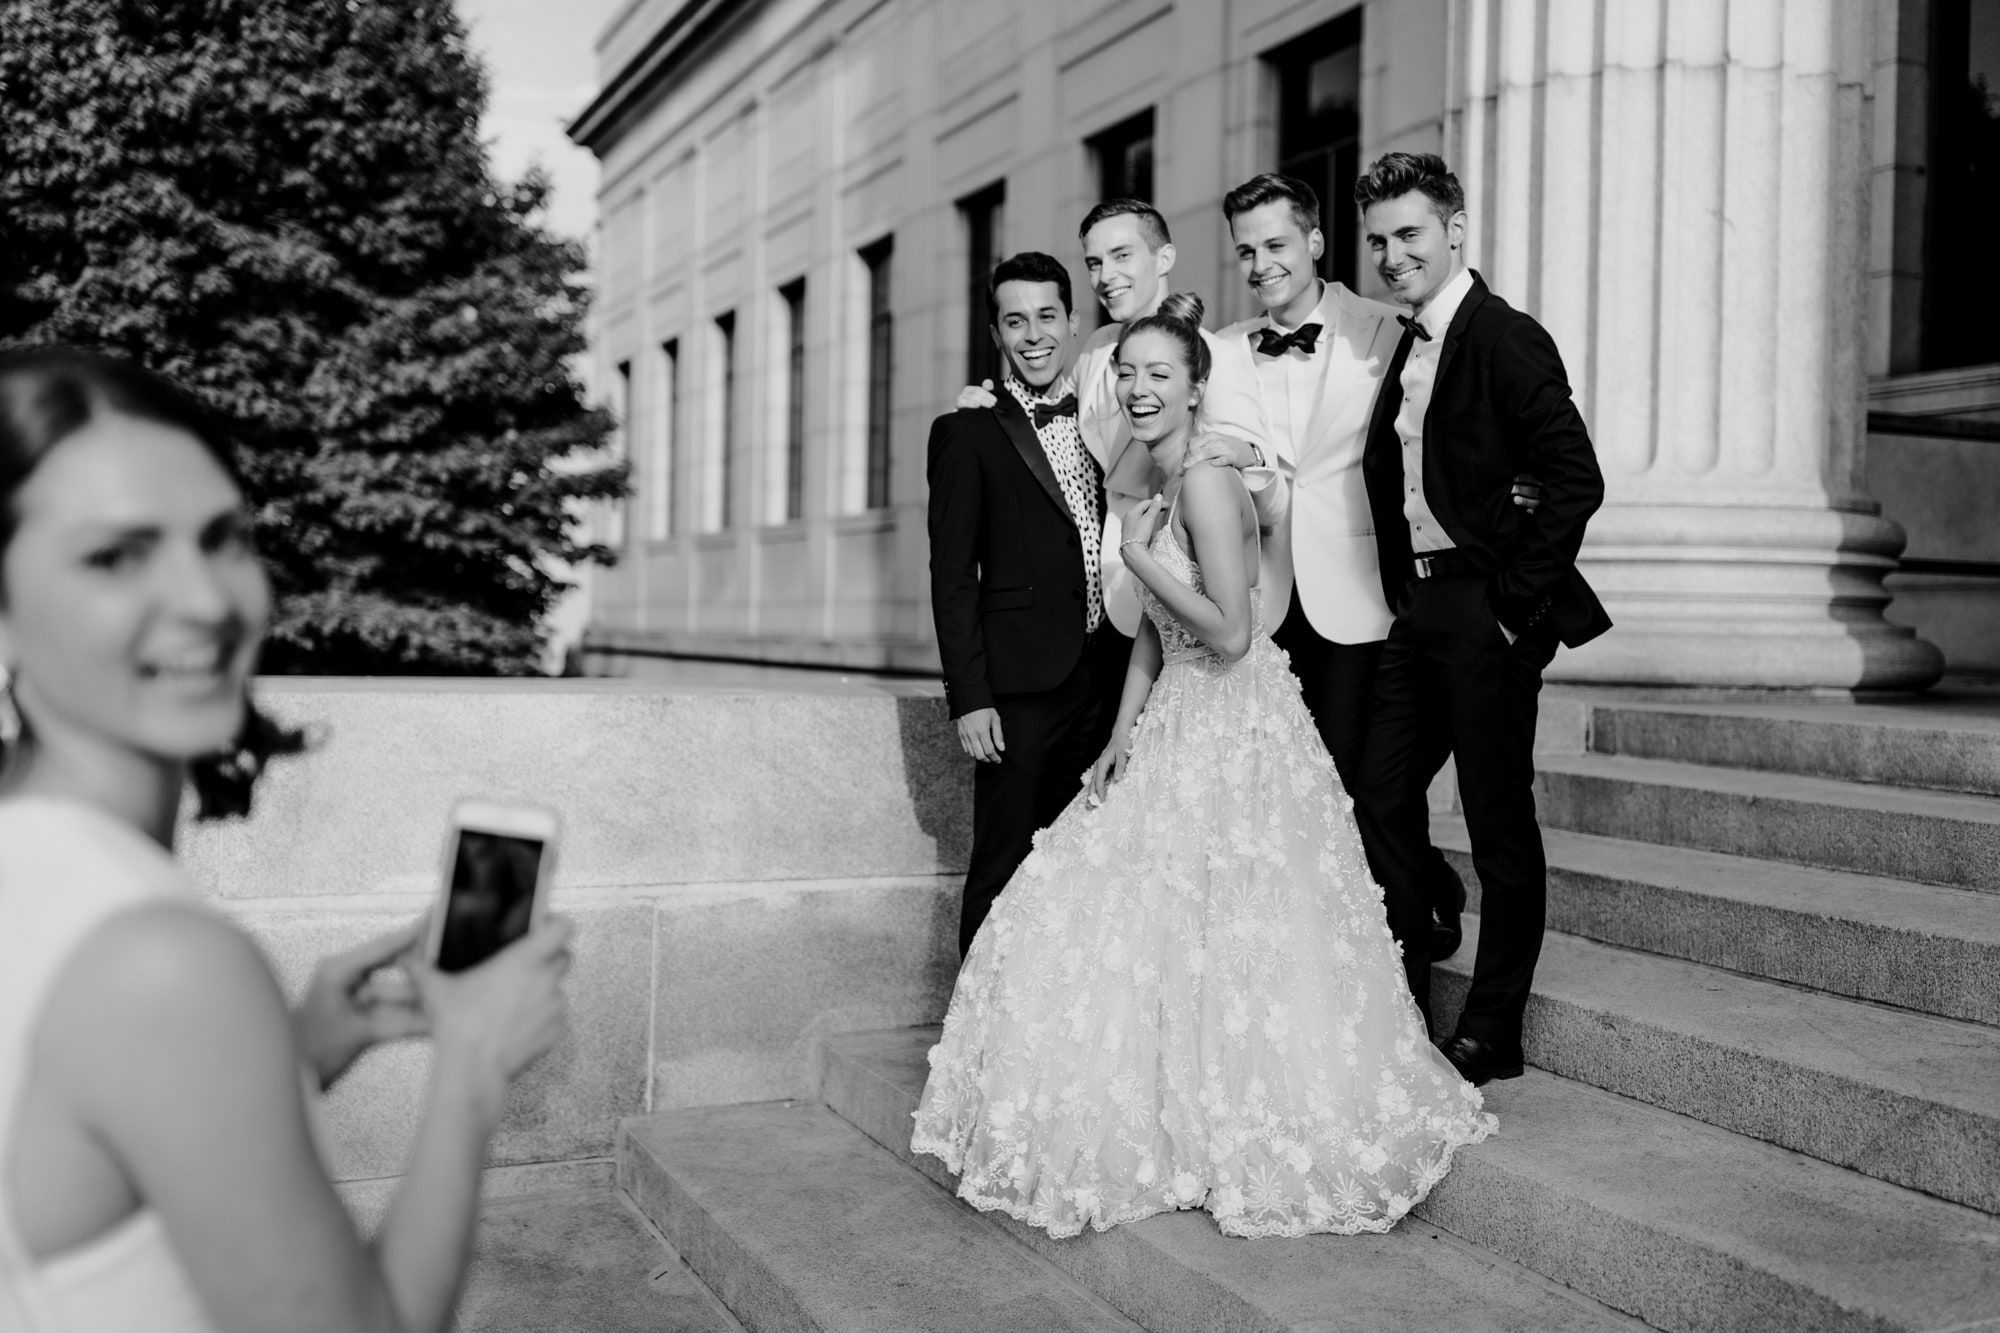 A bride laughs while posing with the groomsmen for wedding photos with Josh Olson Wedding Photographer outside of the Minneapolis Institute of Art.